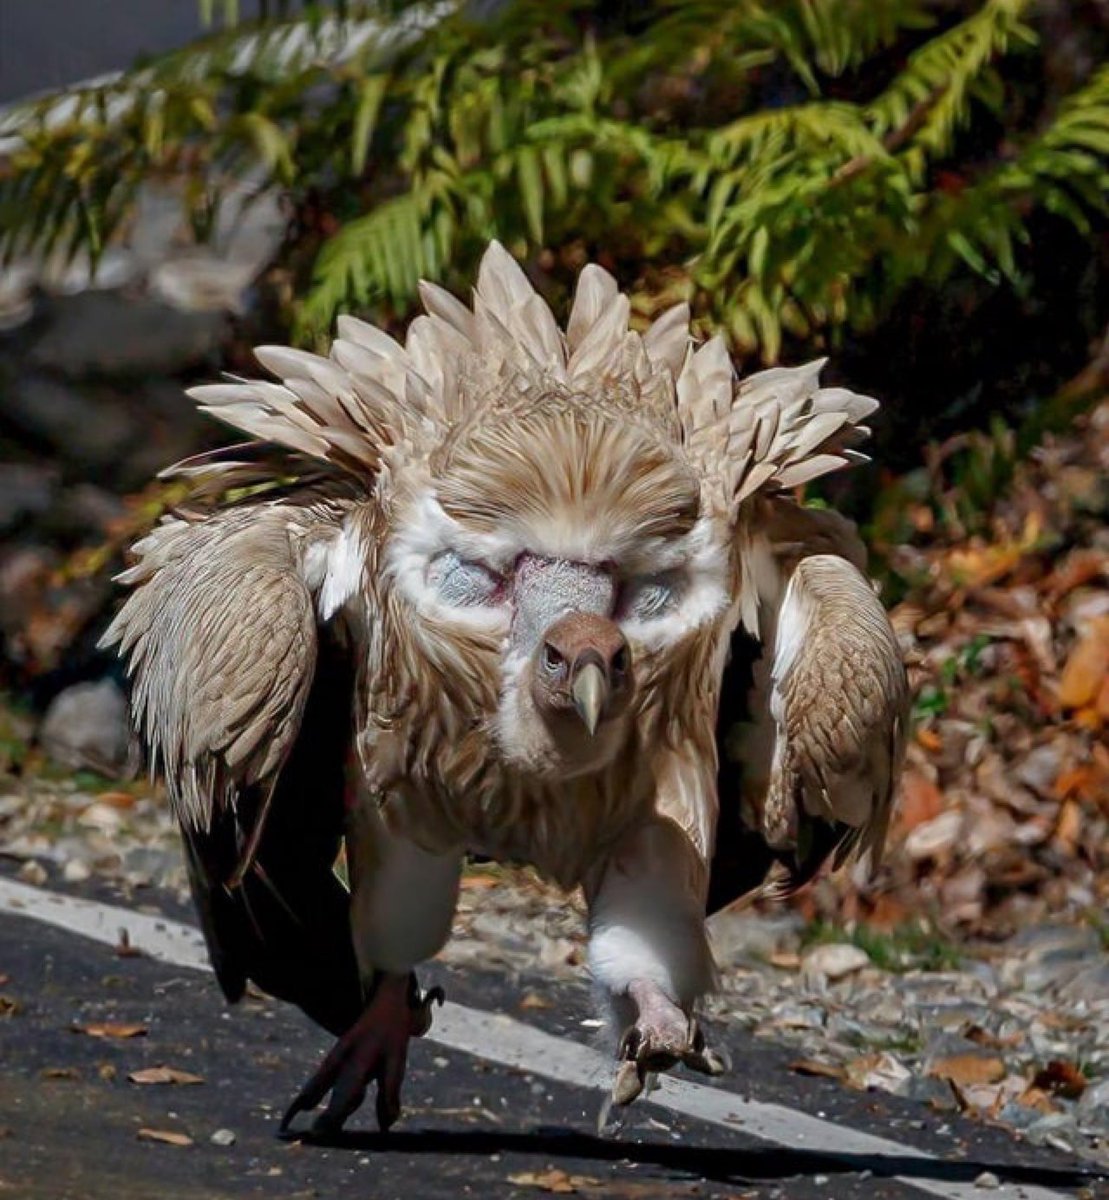 Here’s a Himalayan Griffon vulture in battle mode! It is an “Old World” vulture, which do not have a good sense of smell - this normal for raptors. They rely exclusively on their eyesight to locate food & when soaring can spot a 3-foot animal carcass from 4 miles away.